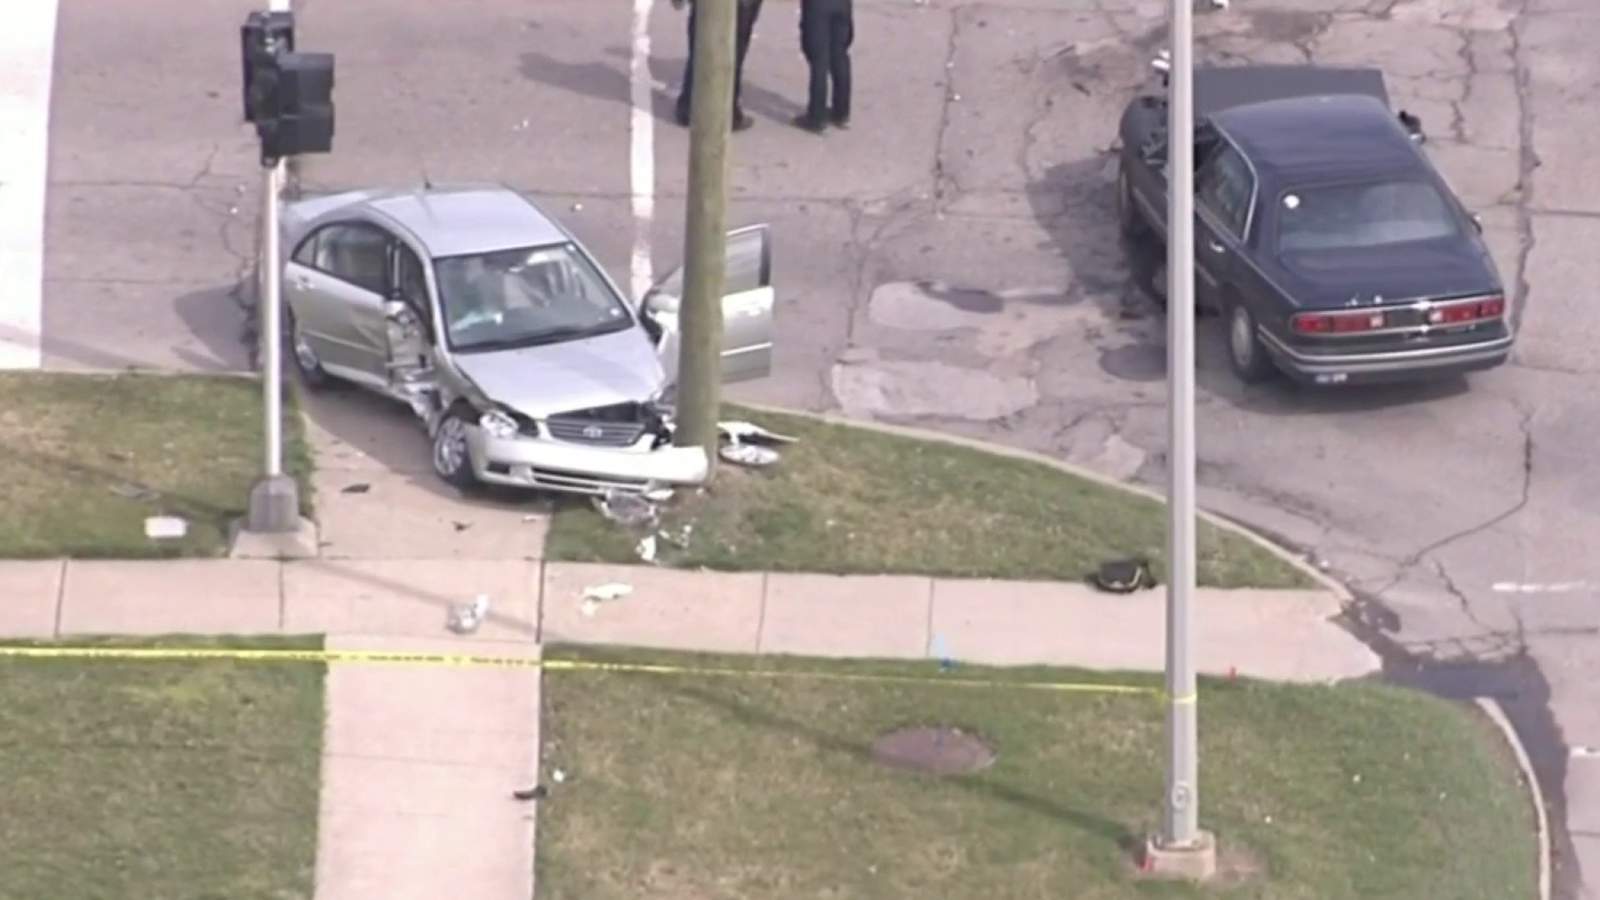 19-year-old charged in crash that killed 107-year-old woman in Allen Park